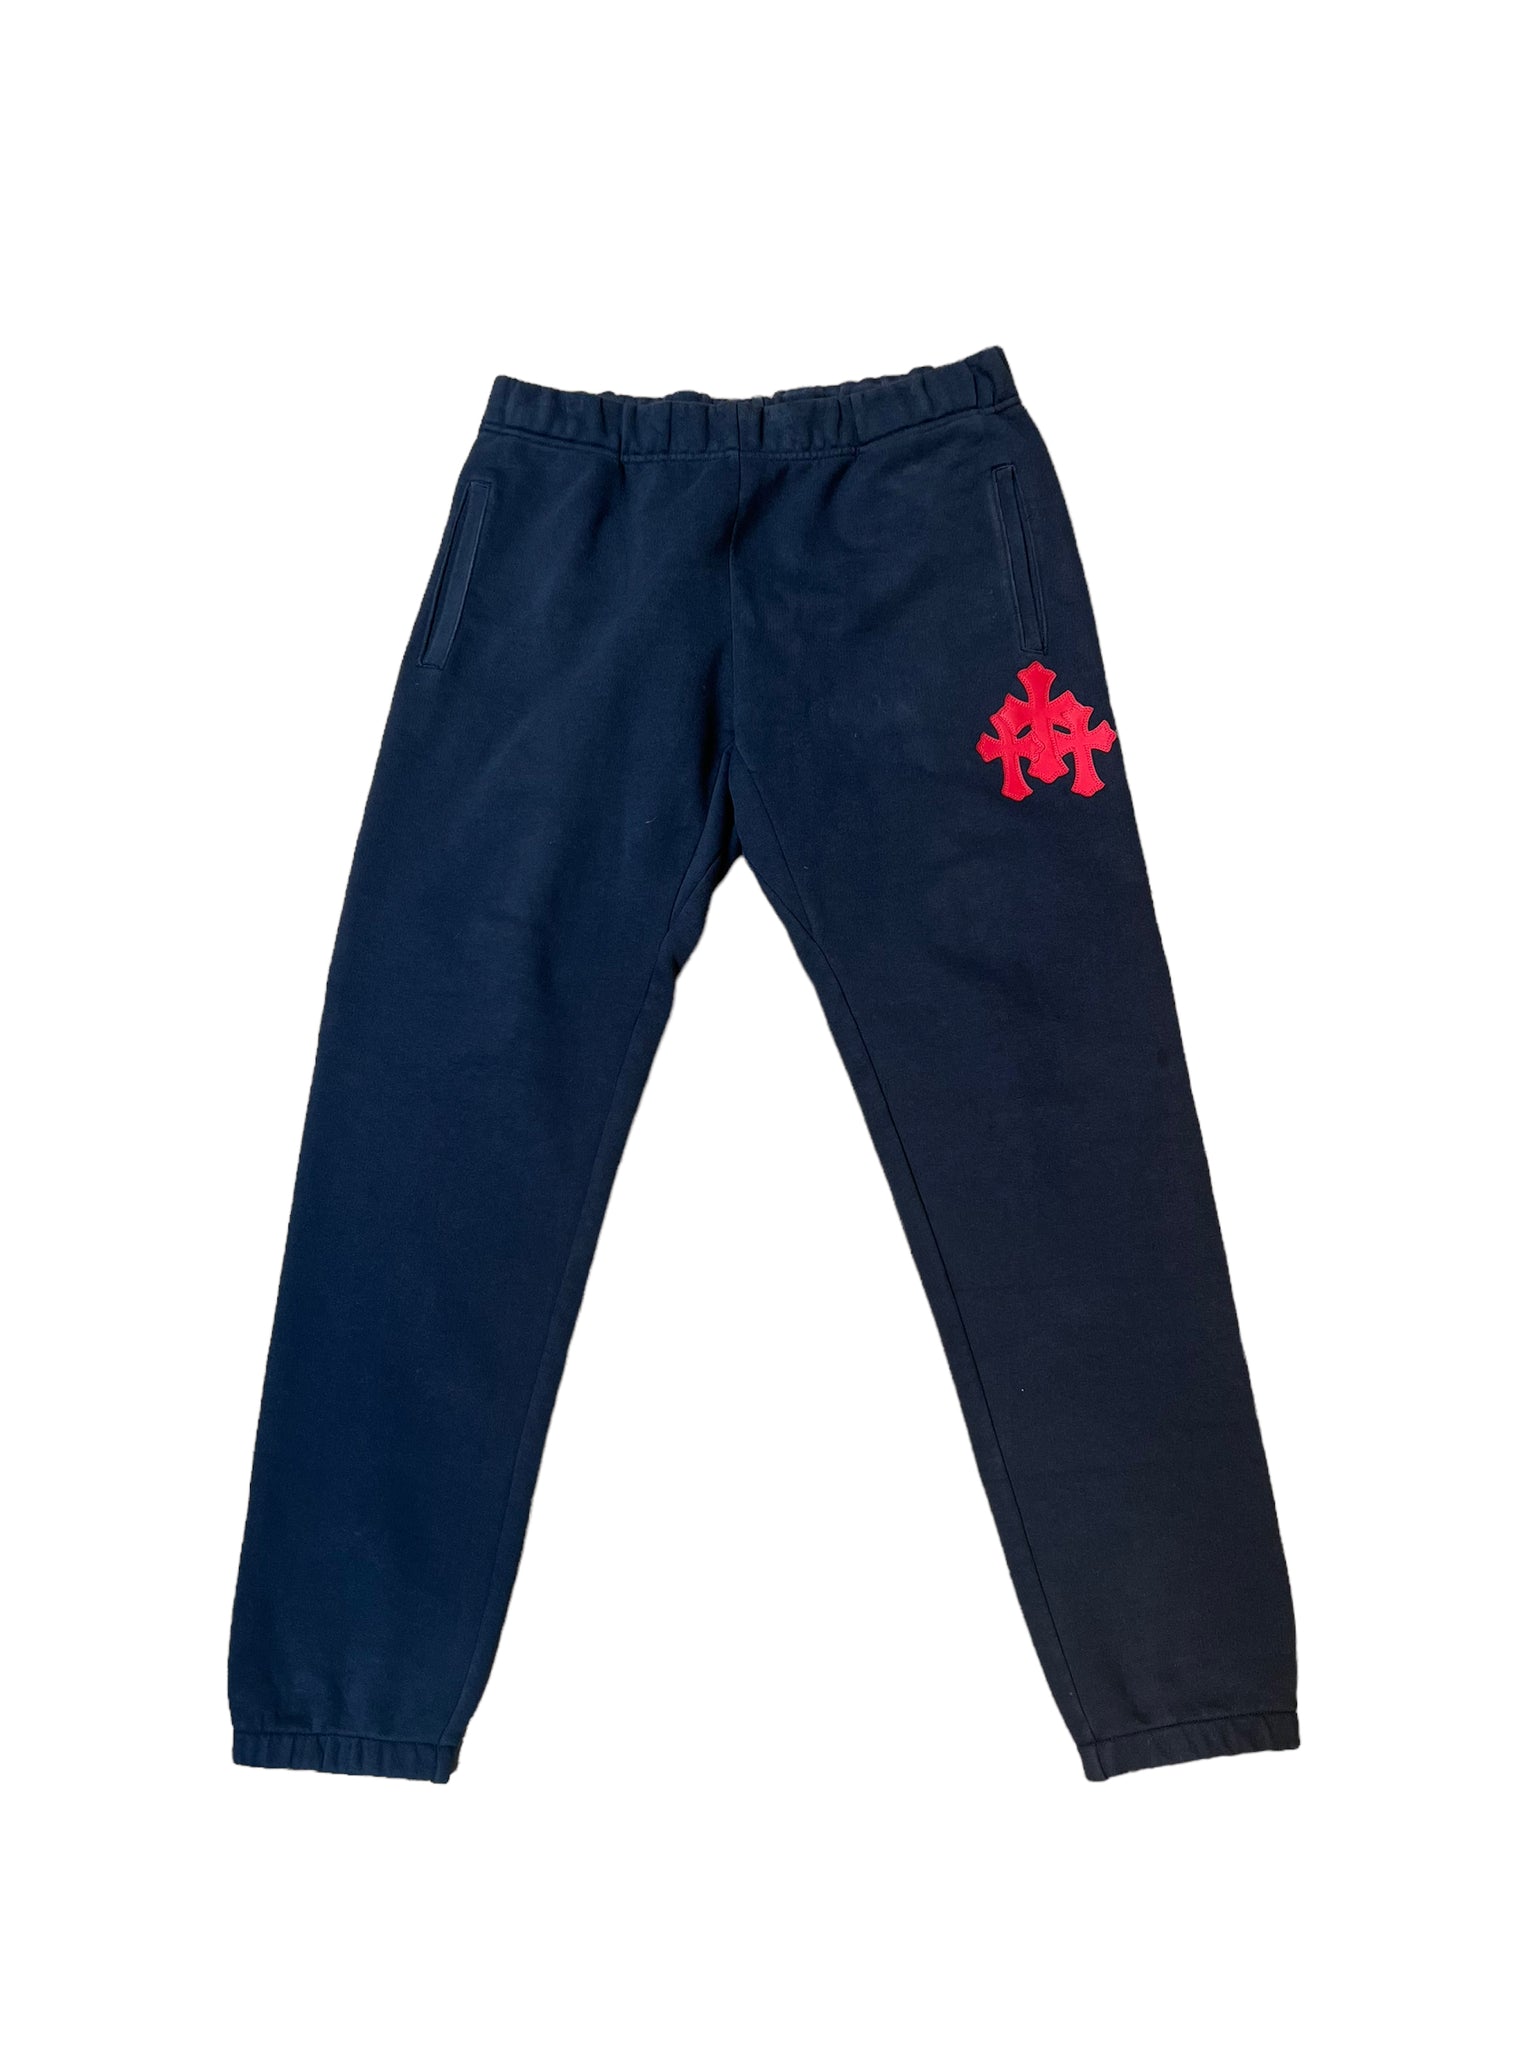 Chrome Hearts Leather Patch Sweatpants "Navy"